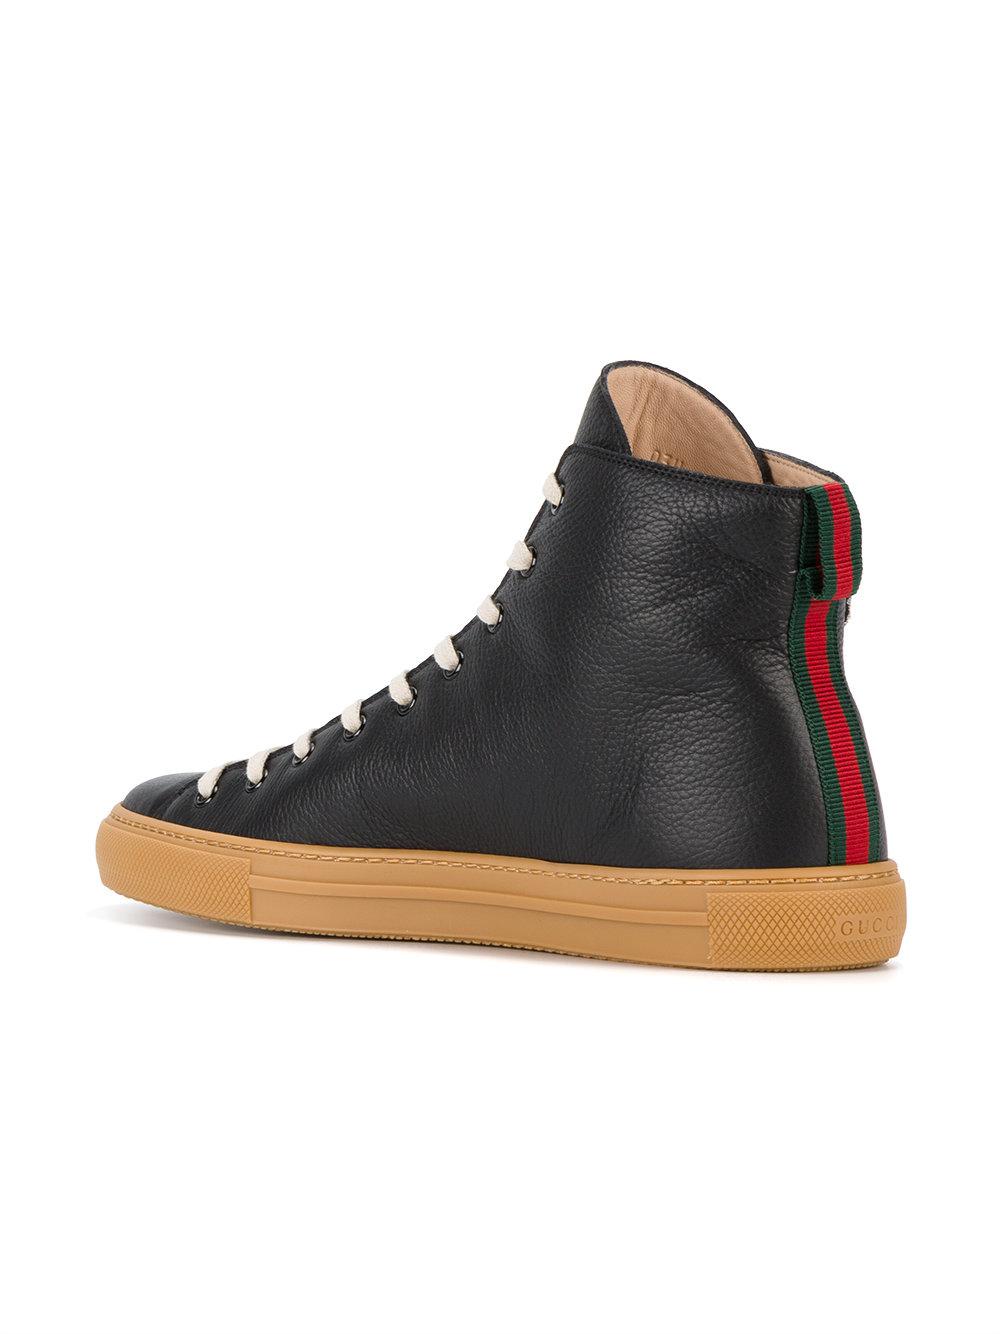 Gucci Leather Donald Duck Hi-top Sneakers in Black for Men - Lyst